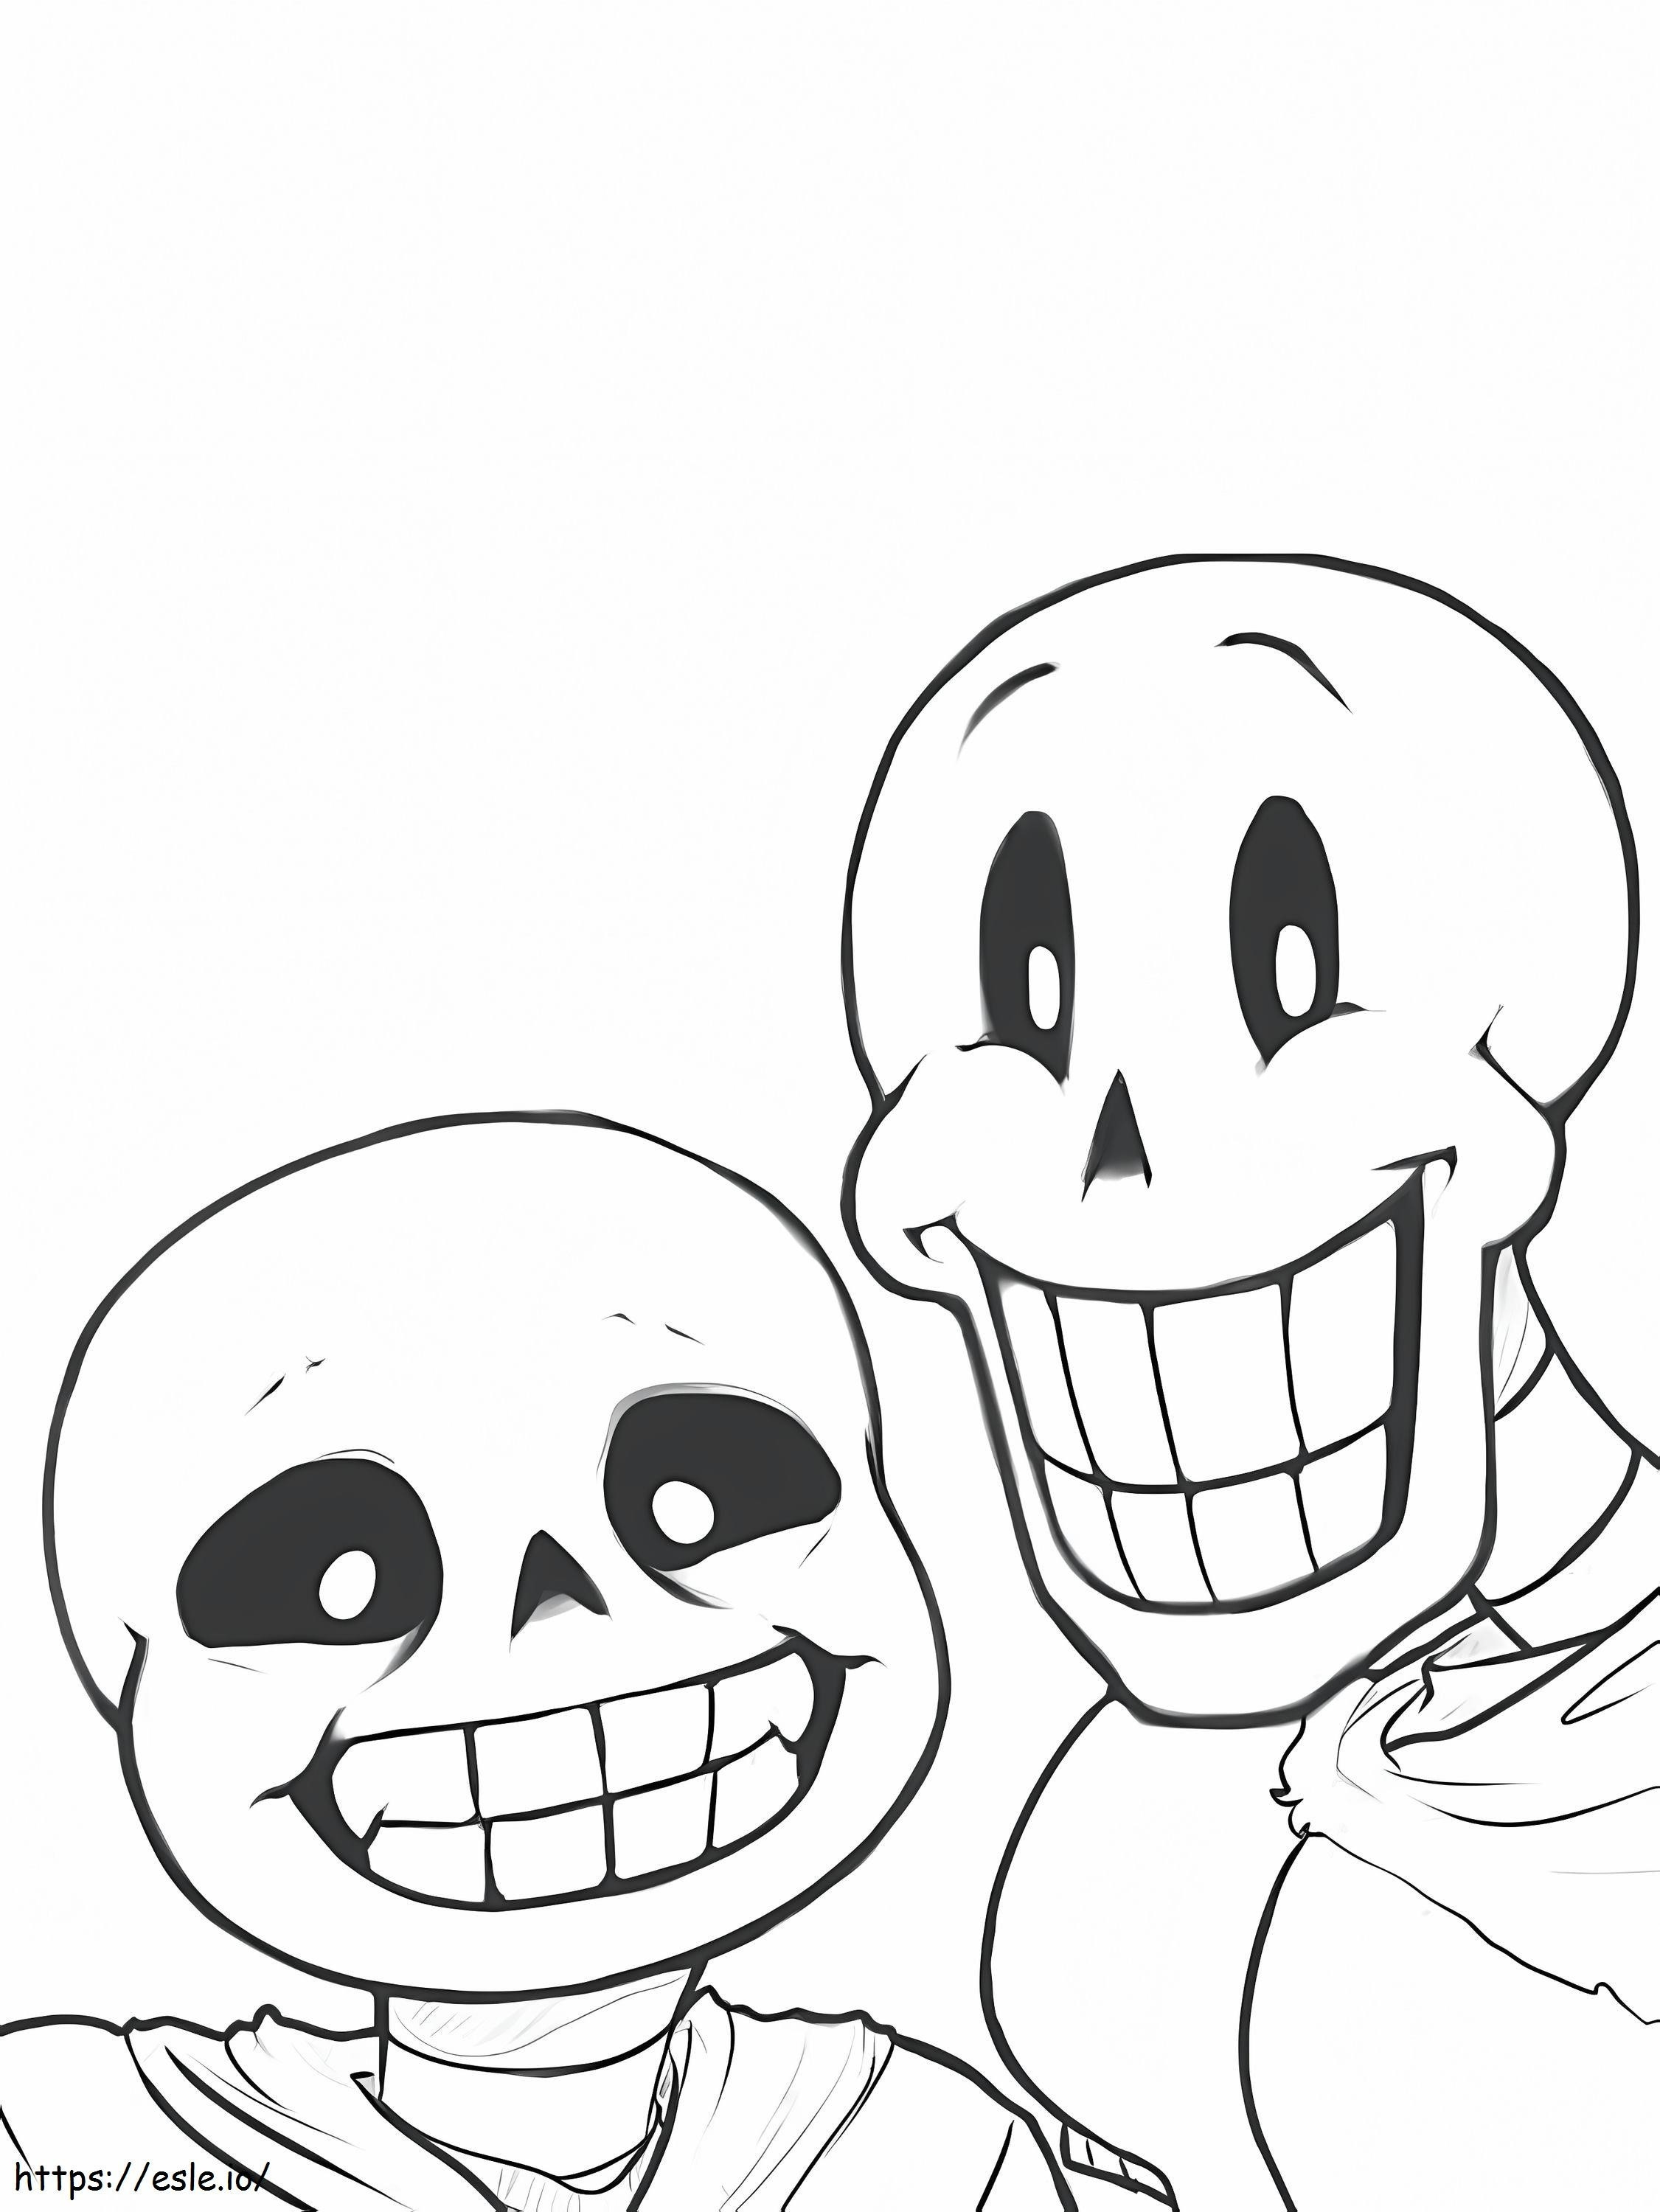 Happy Papyrus And Sans coloring page